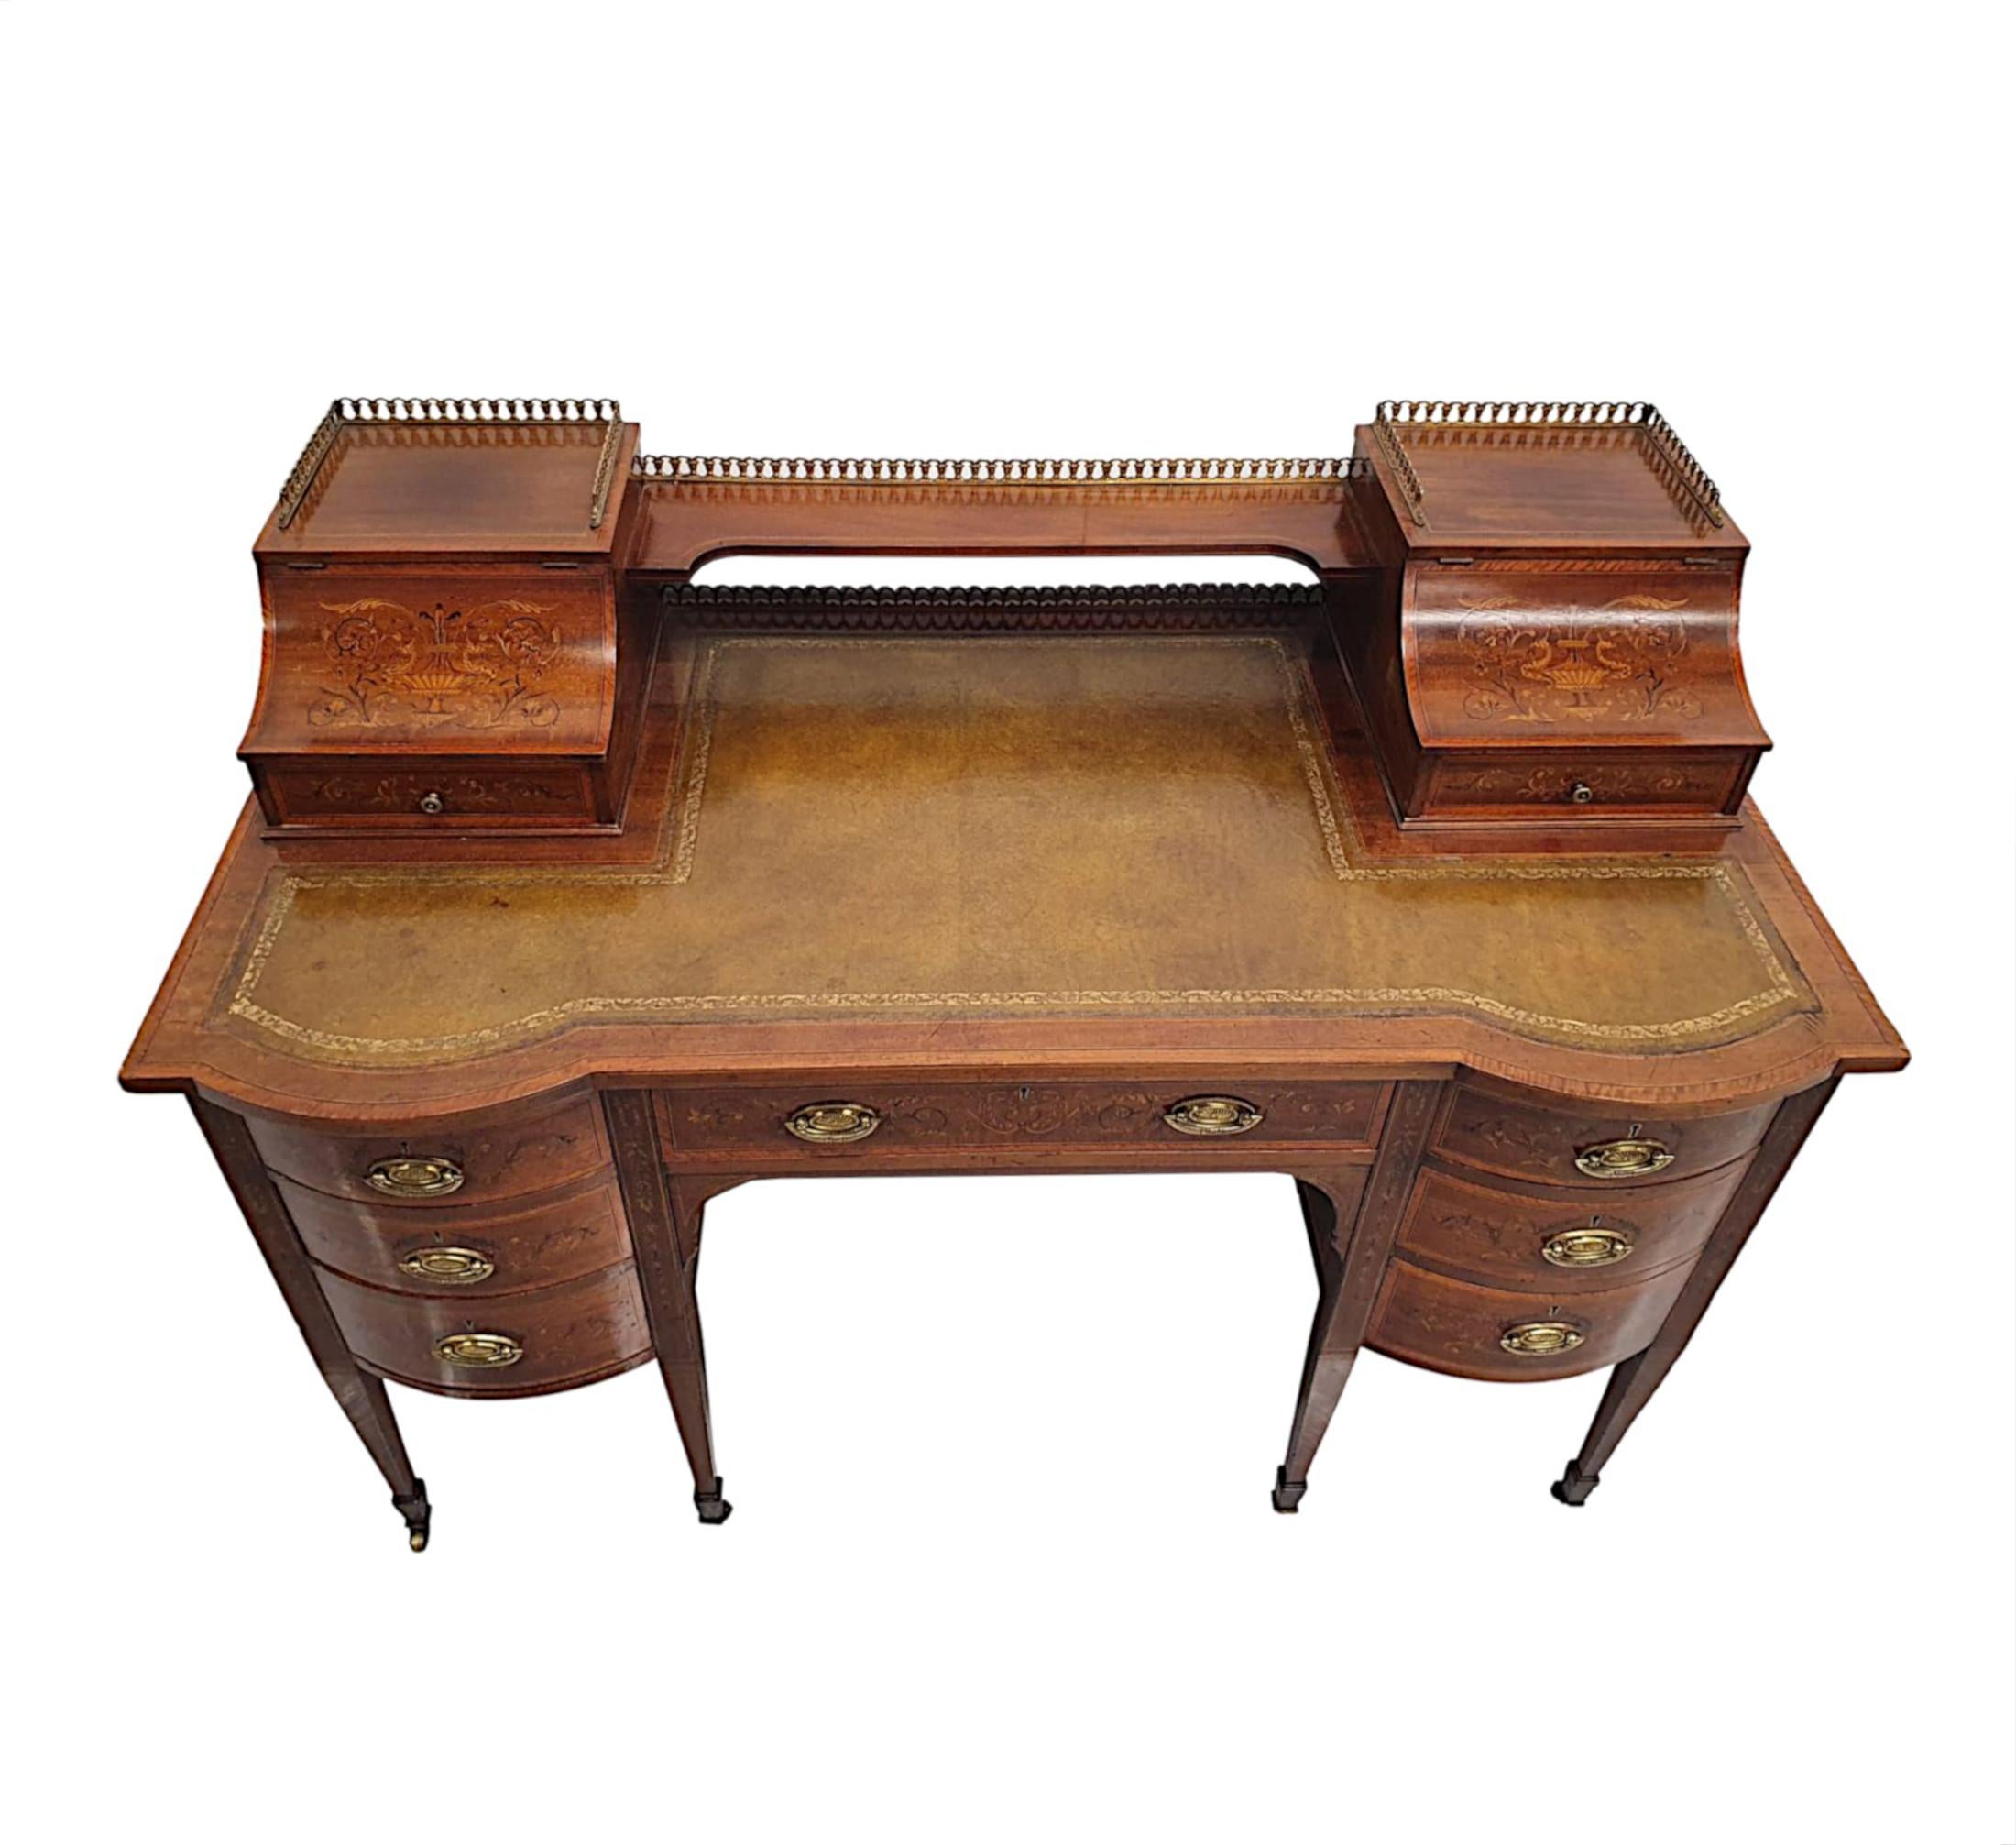 English A Stunning Edwardian Desk in the Carlton House Style by Maple of London For Sale